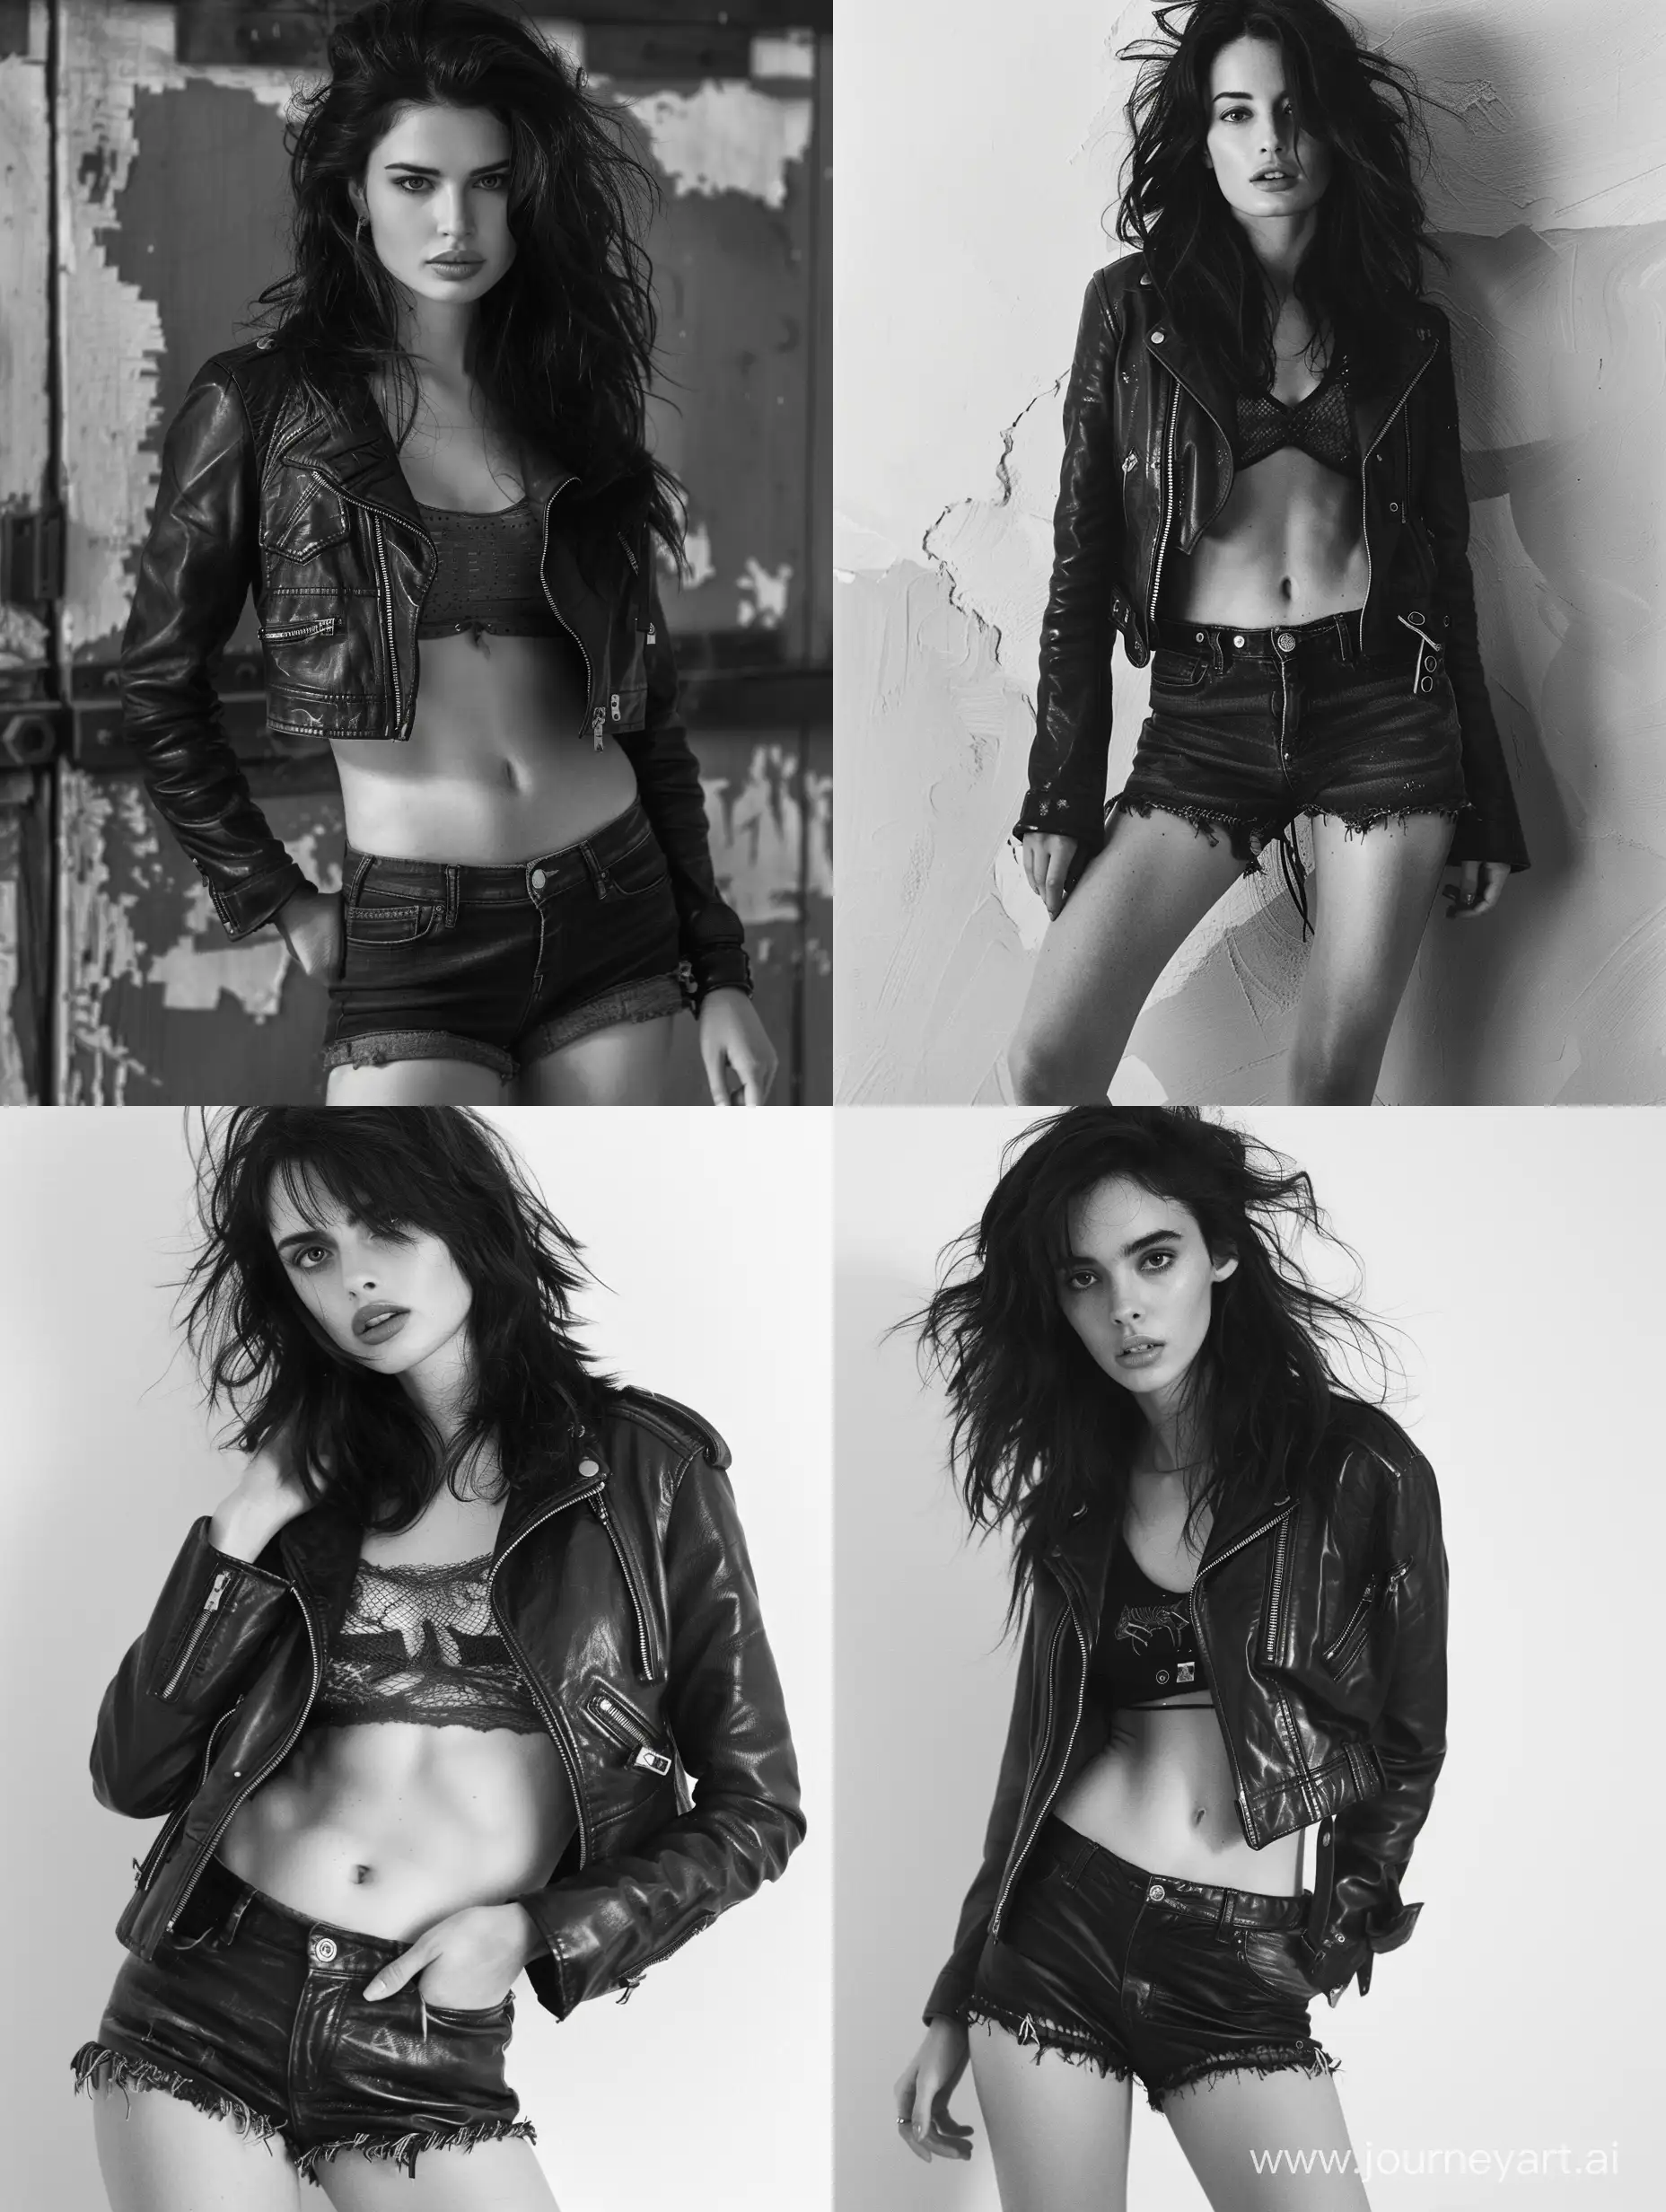 Bold-Style-Photoshoot-with-DarkHaired-Girl-in-Shorts-and-Leather-Jacket